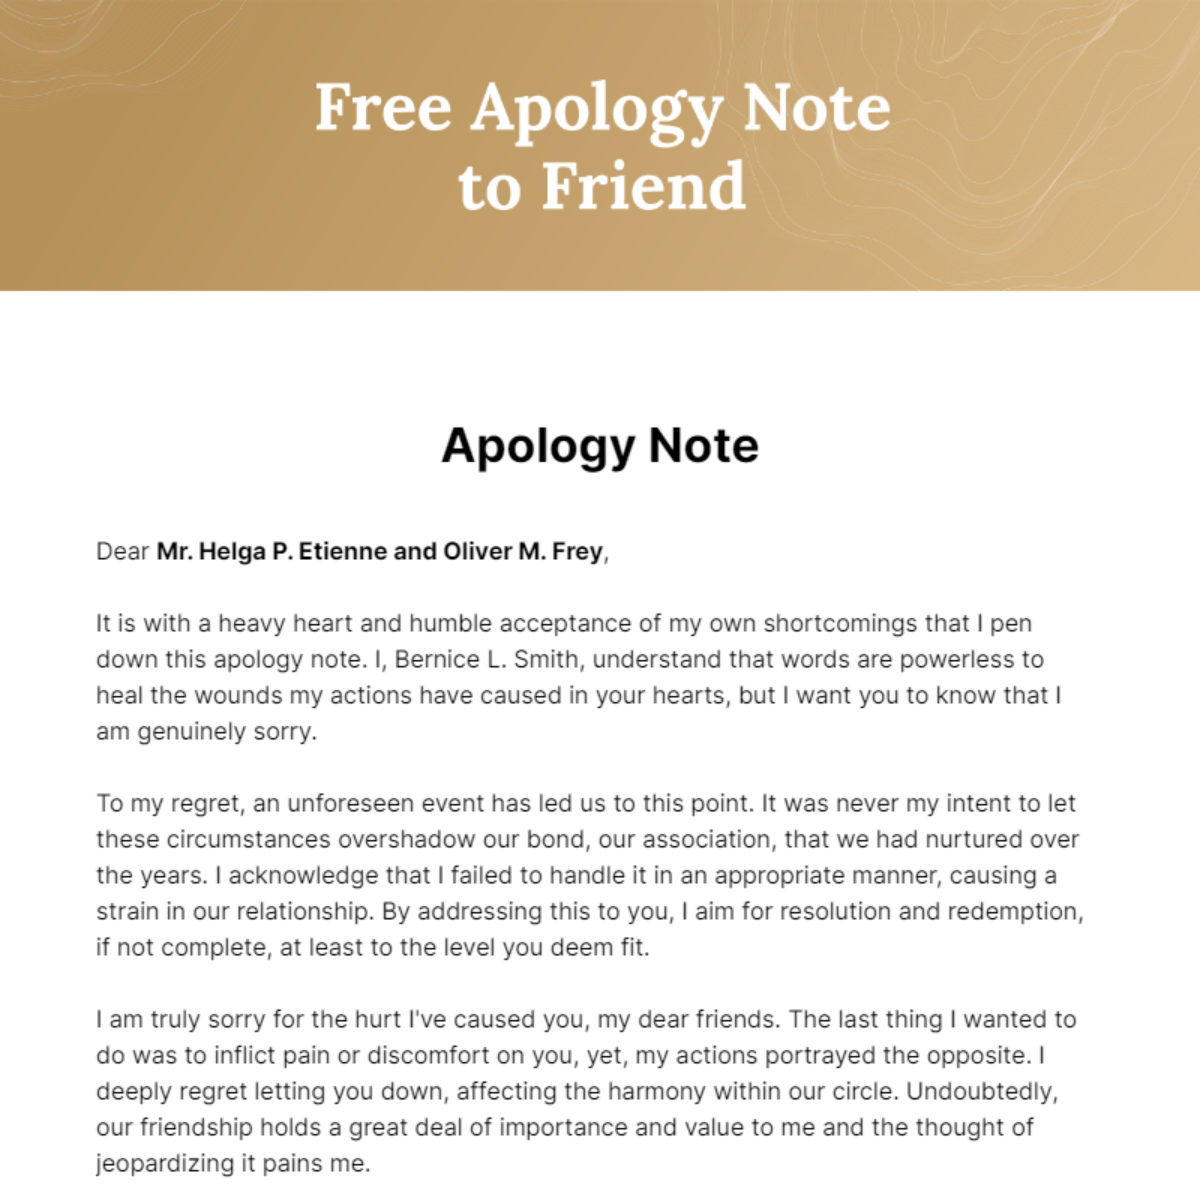 Free Apology Note to Friend Template